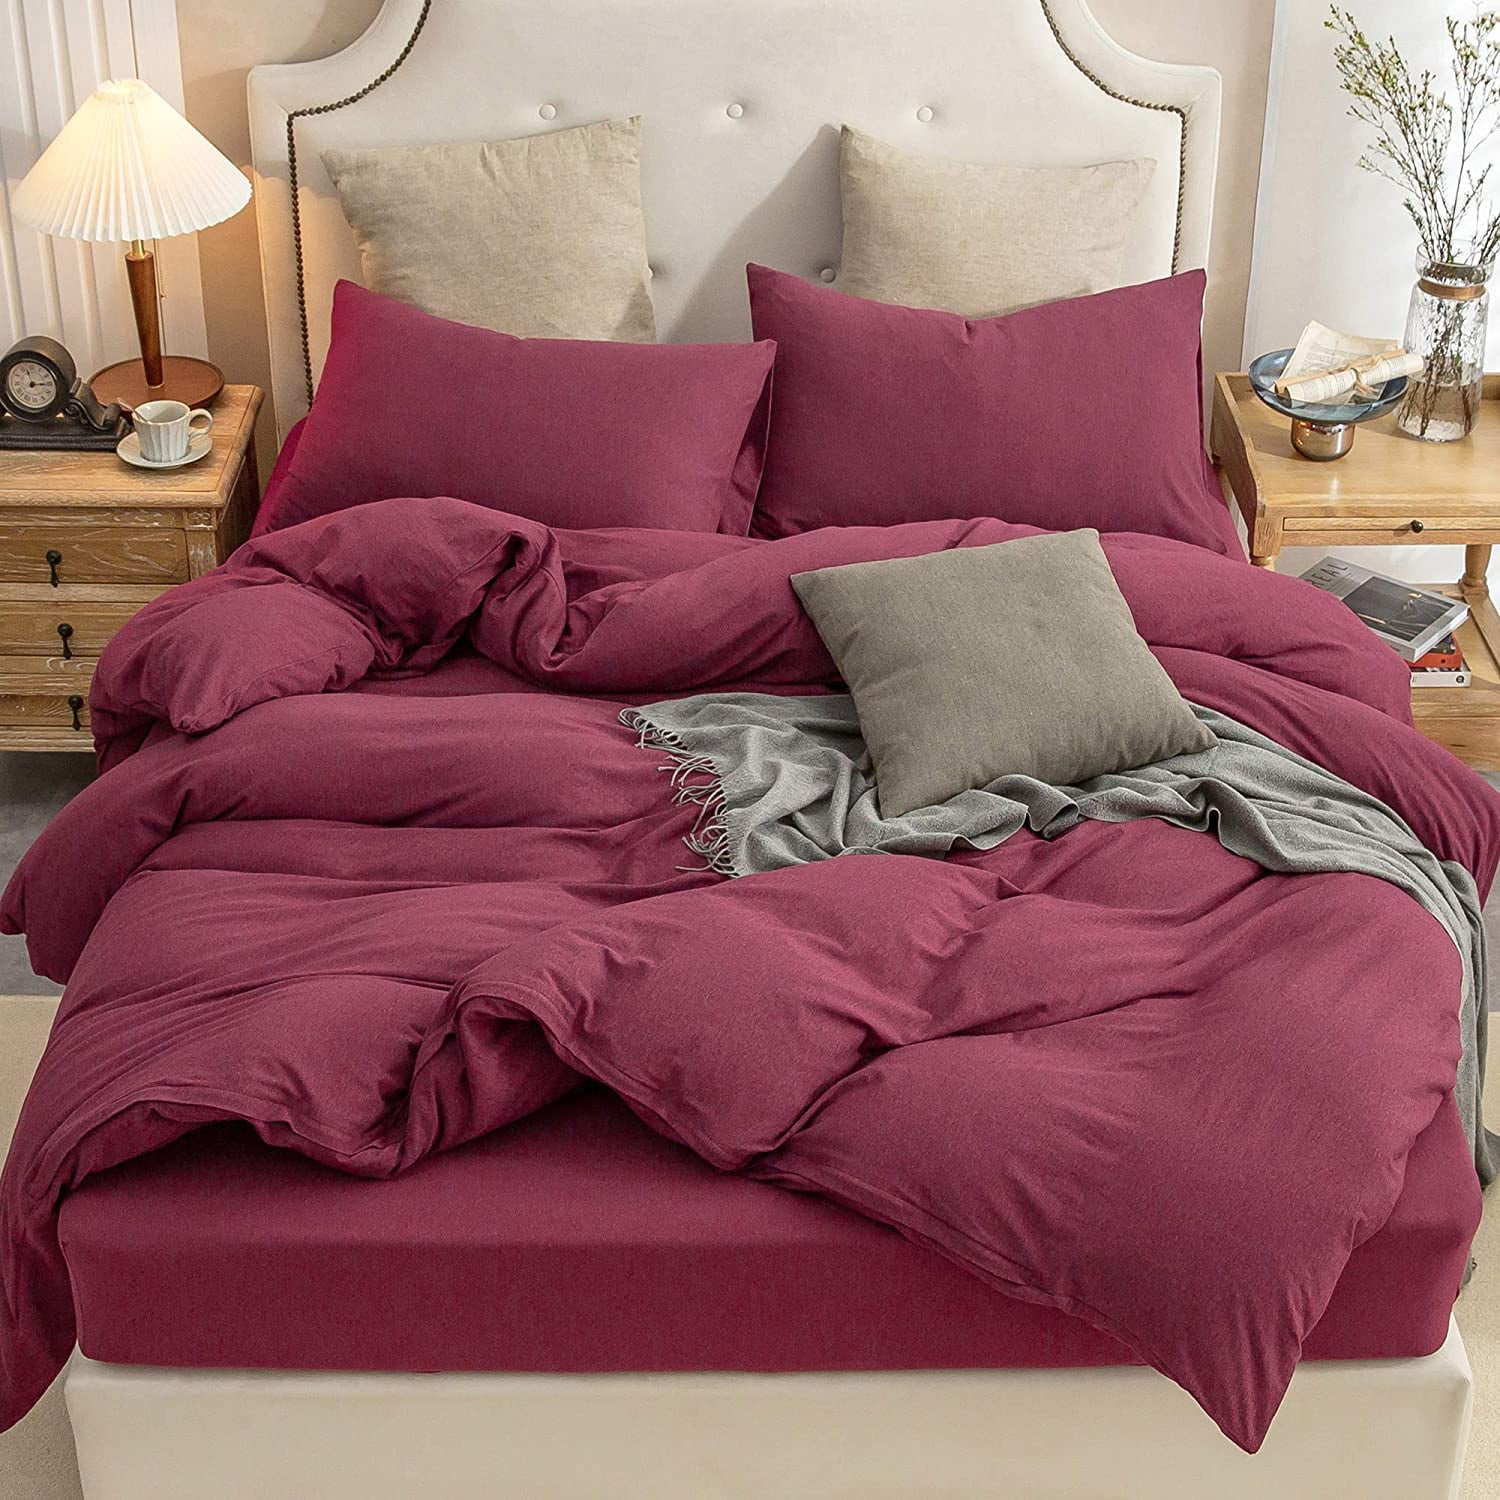 Luxury Soft Navy Blue, Burgundy, Red, White, Green, Turquoise 1500 Series high Thread Count Brushed Microfiber Grand Linen 3-Piece Fine Printed Country Rose Duvet Cover Set Queen Size Durable